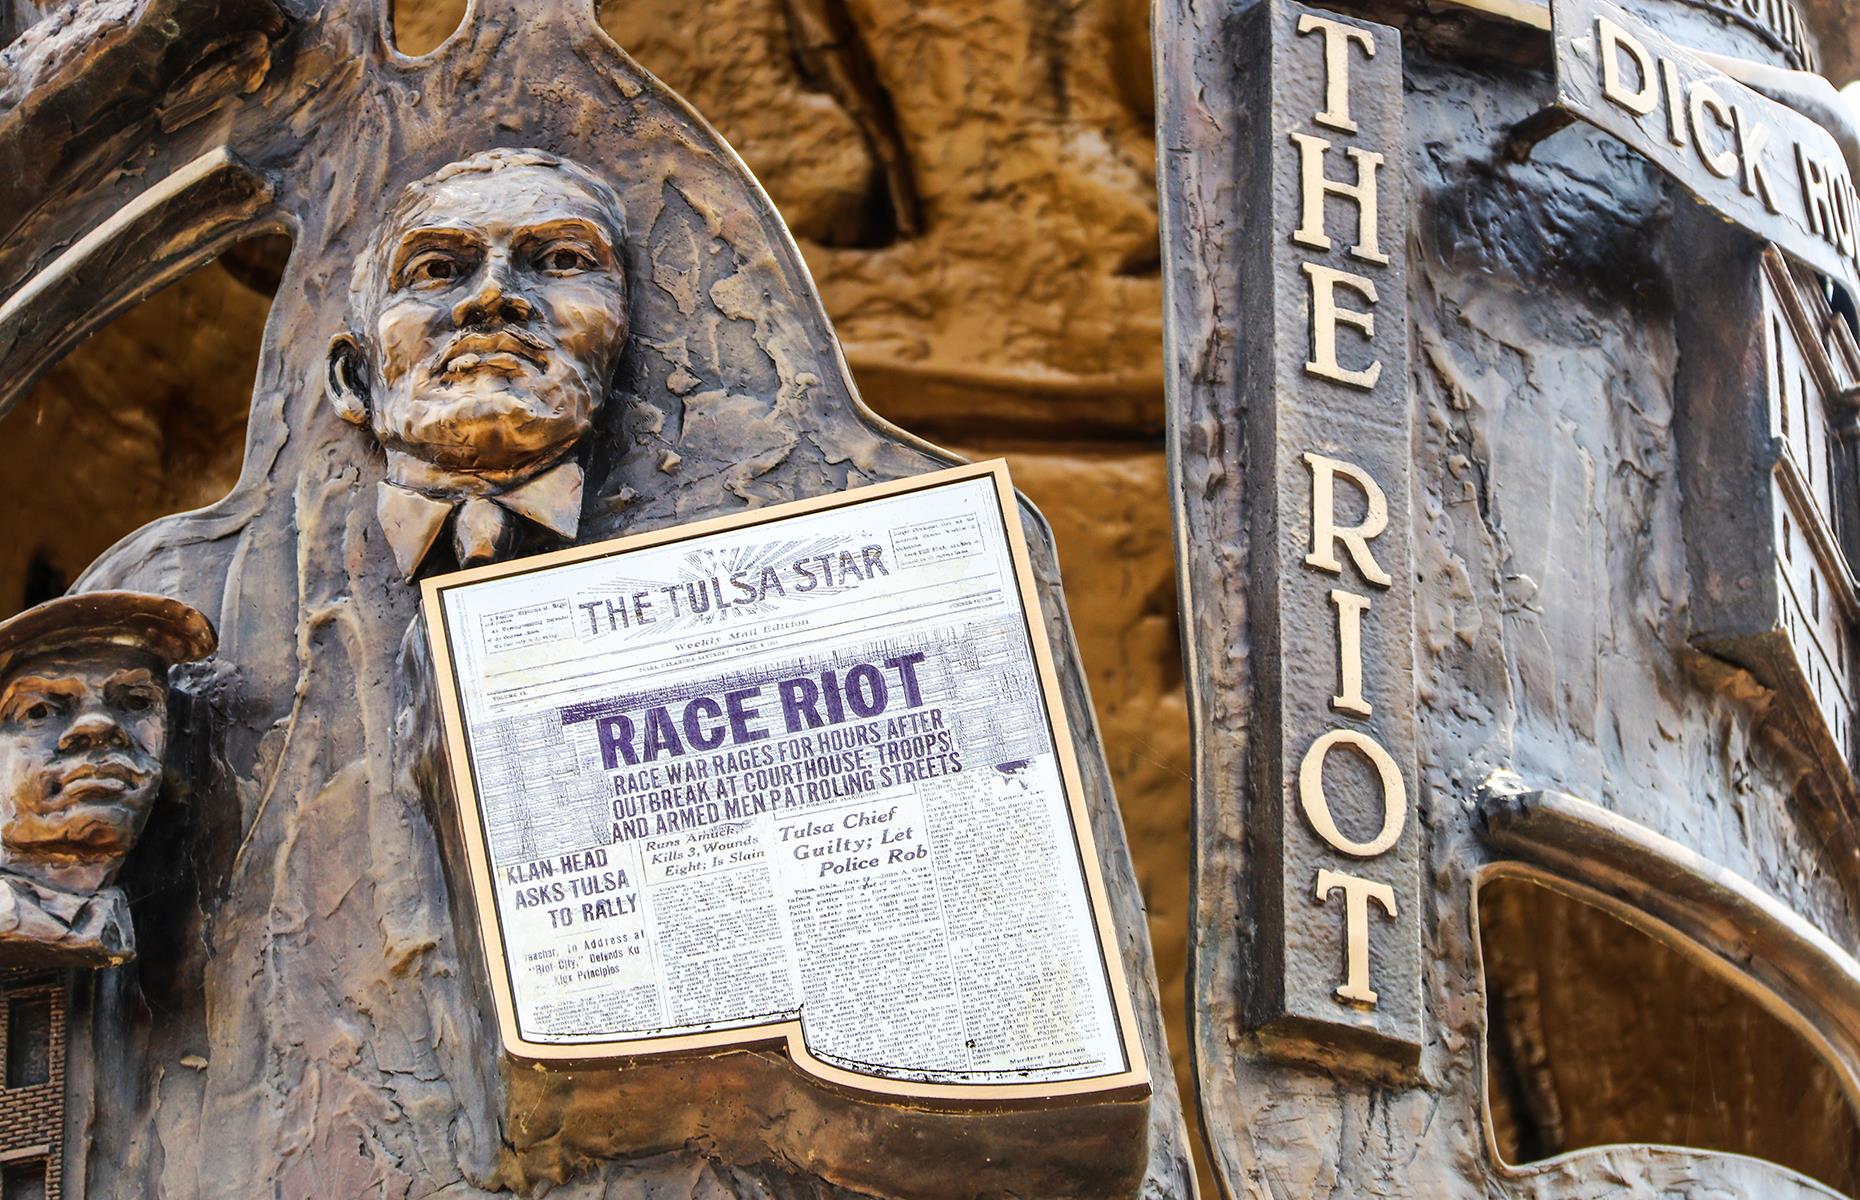 <p>Until the 100th anniversary of the Tulsa Race Massacre in 2021, little was known about it. <a href="https://www.facebook.com/therealblackwallstreettour/">This tour</a>, which takes place through the historic Tulsa district of Greenwood, will give you an education that might be painful but insightful. You’ll hear the details about the people and buildings that were affected by the massacre, and the places that were bombed, including churches and schools. Admission is $15.</p>